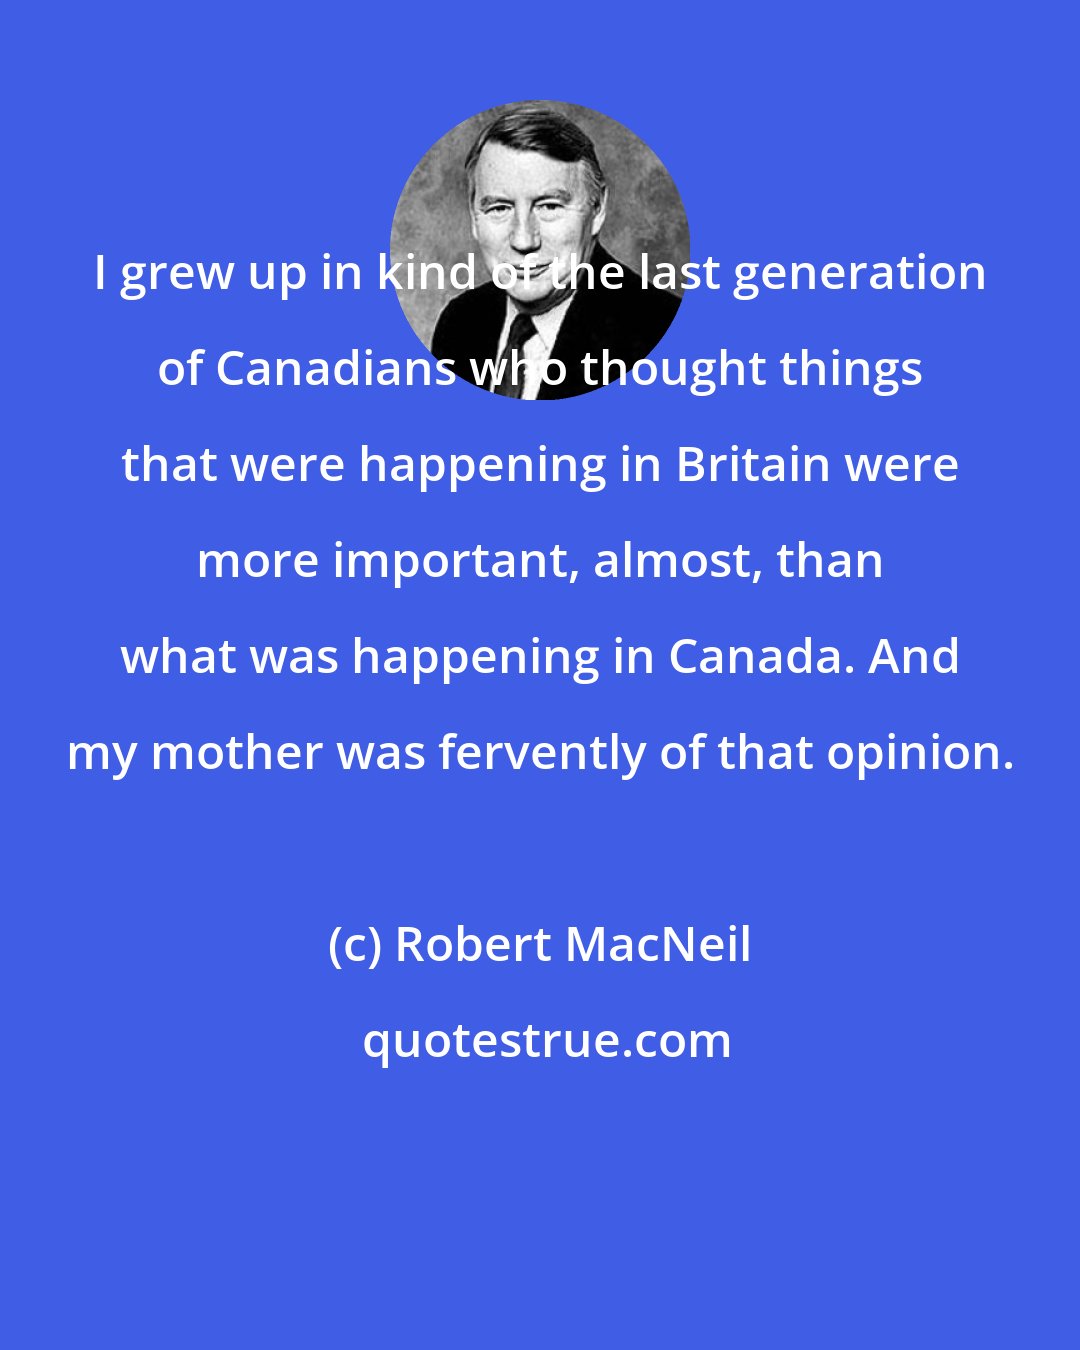 Robert MacNeil: I grew up in kind of the last generation of Canadians who thought things that were happening in Britain were more important, almost, than what was happening in Canada. And my mother was fervently of that opinion.